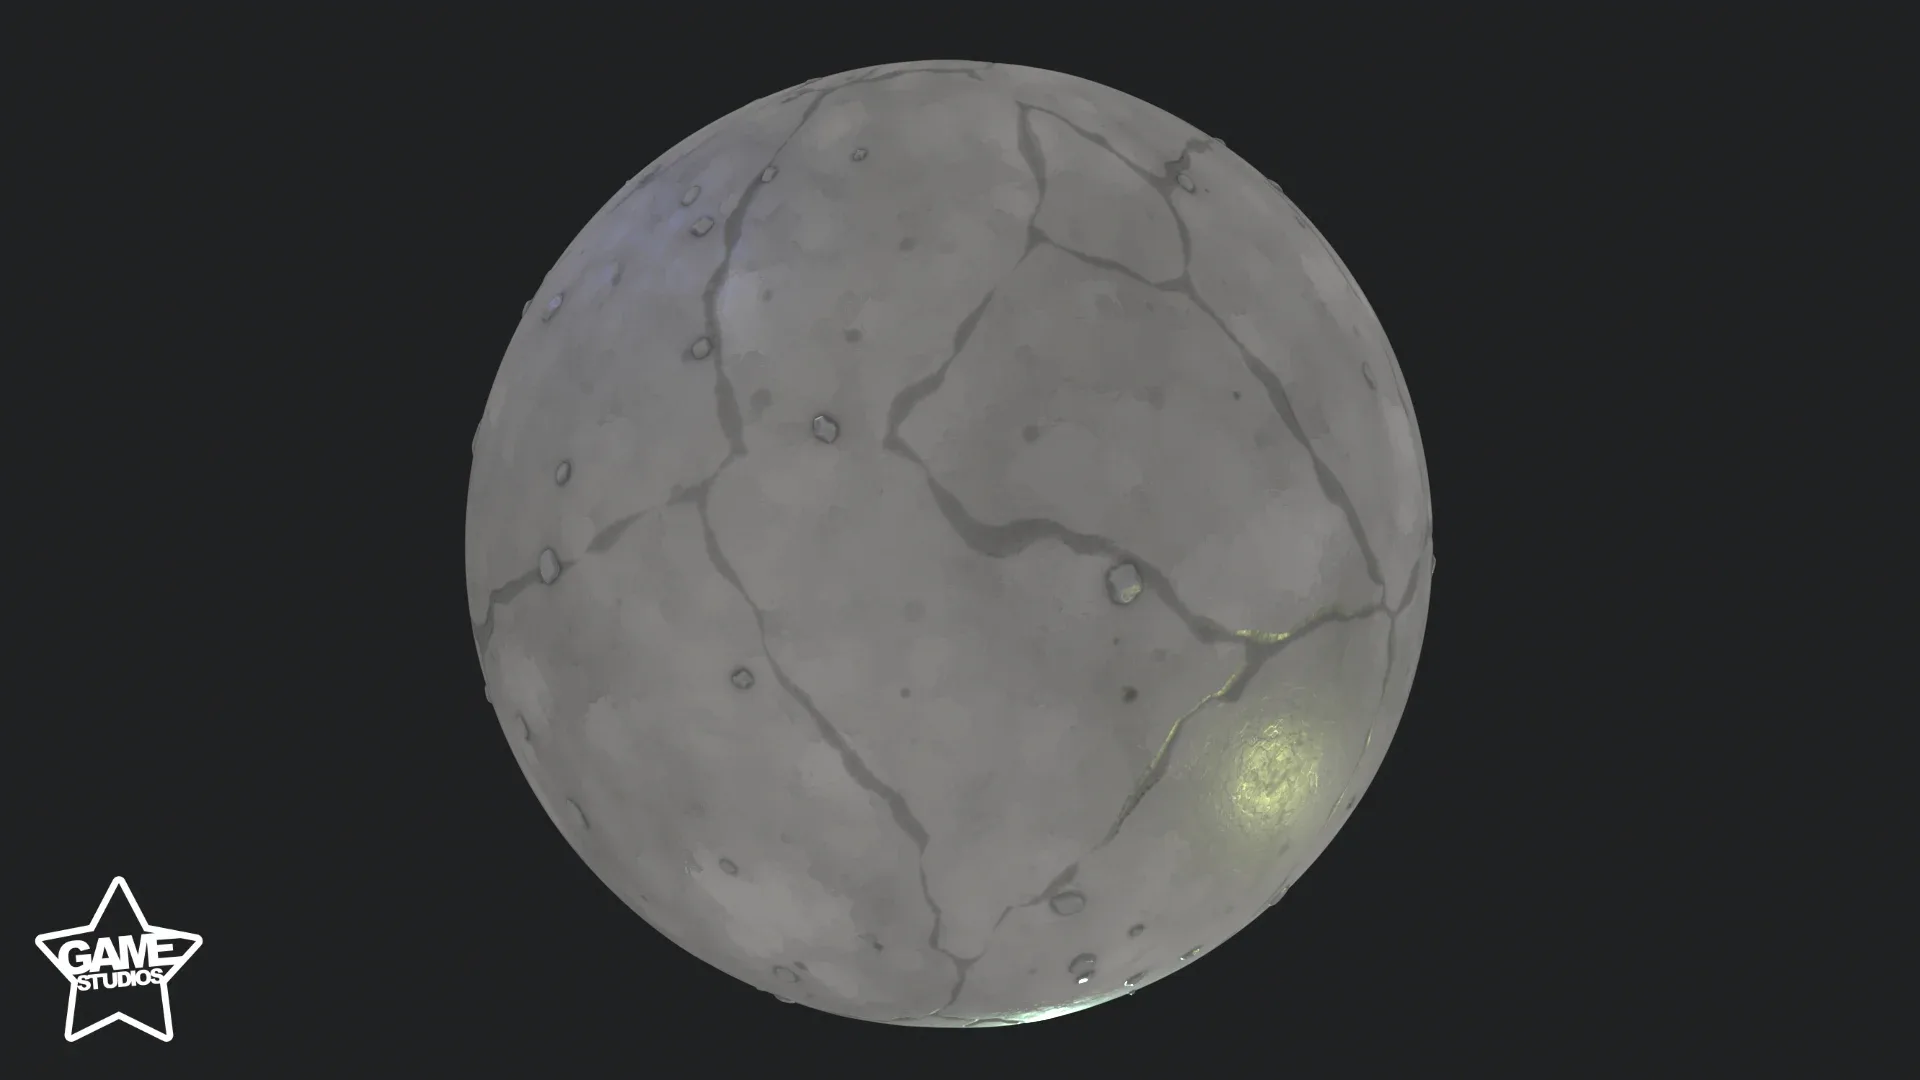 Stylized Cracked Concrete Material 02 - Substance 3D Designer